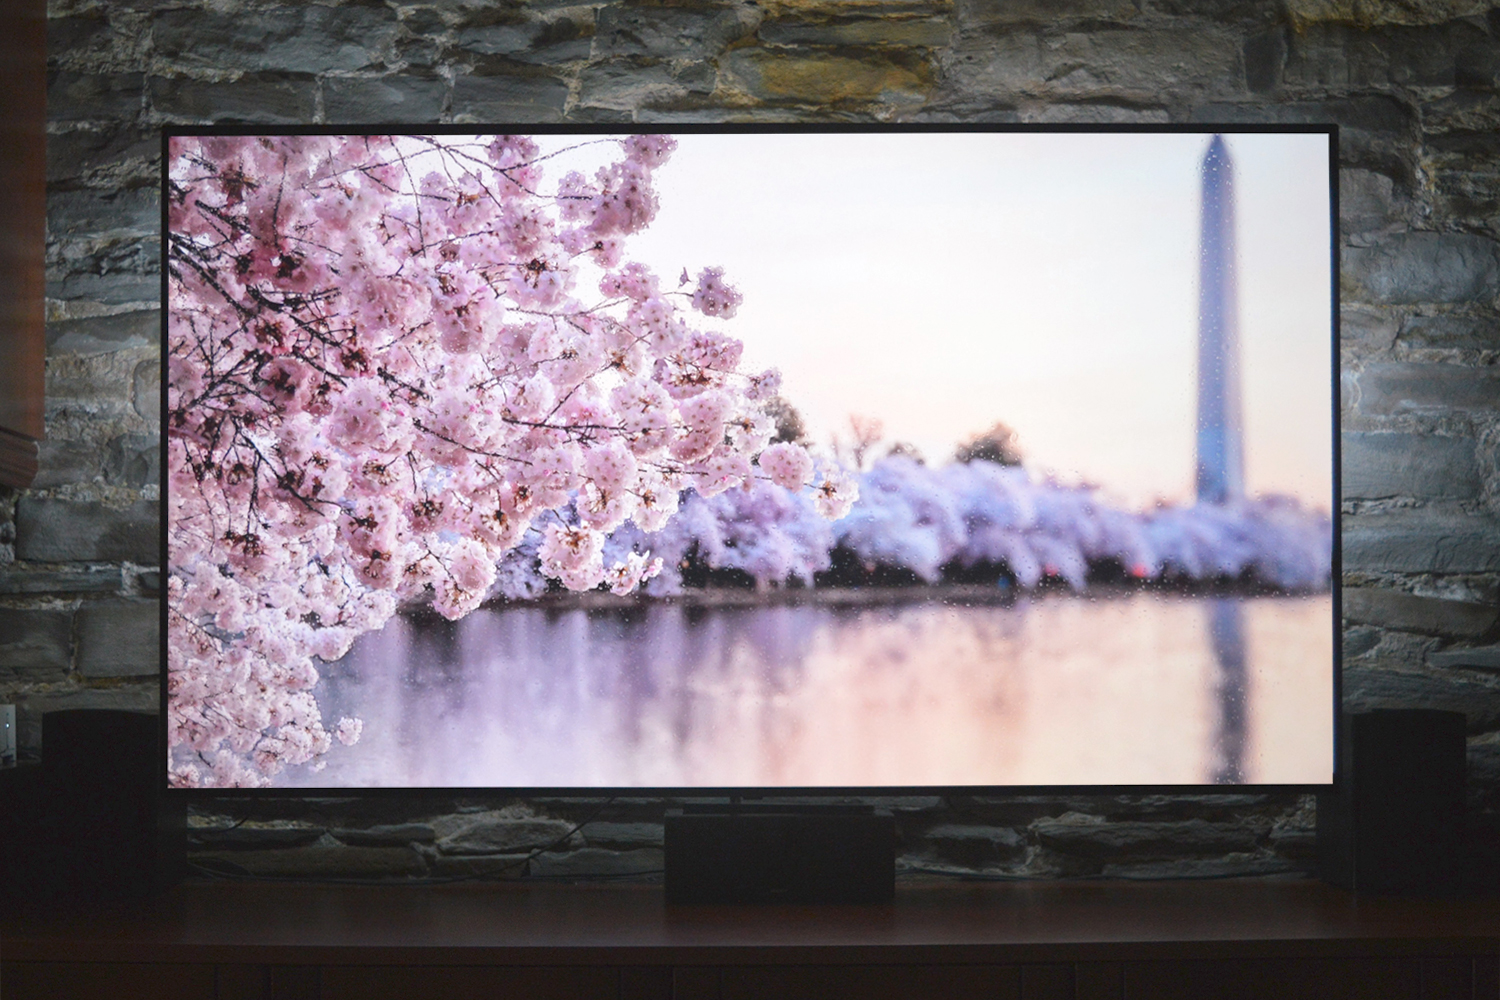 Bloom LED TV: high quality images and size to suit your needs